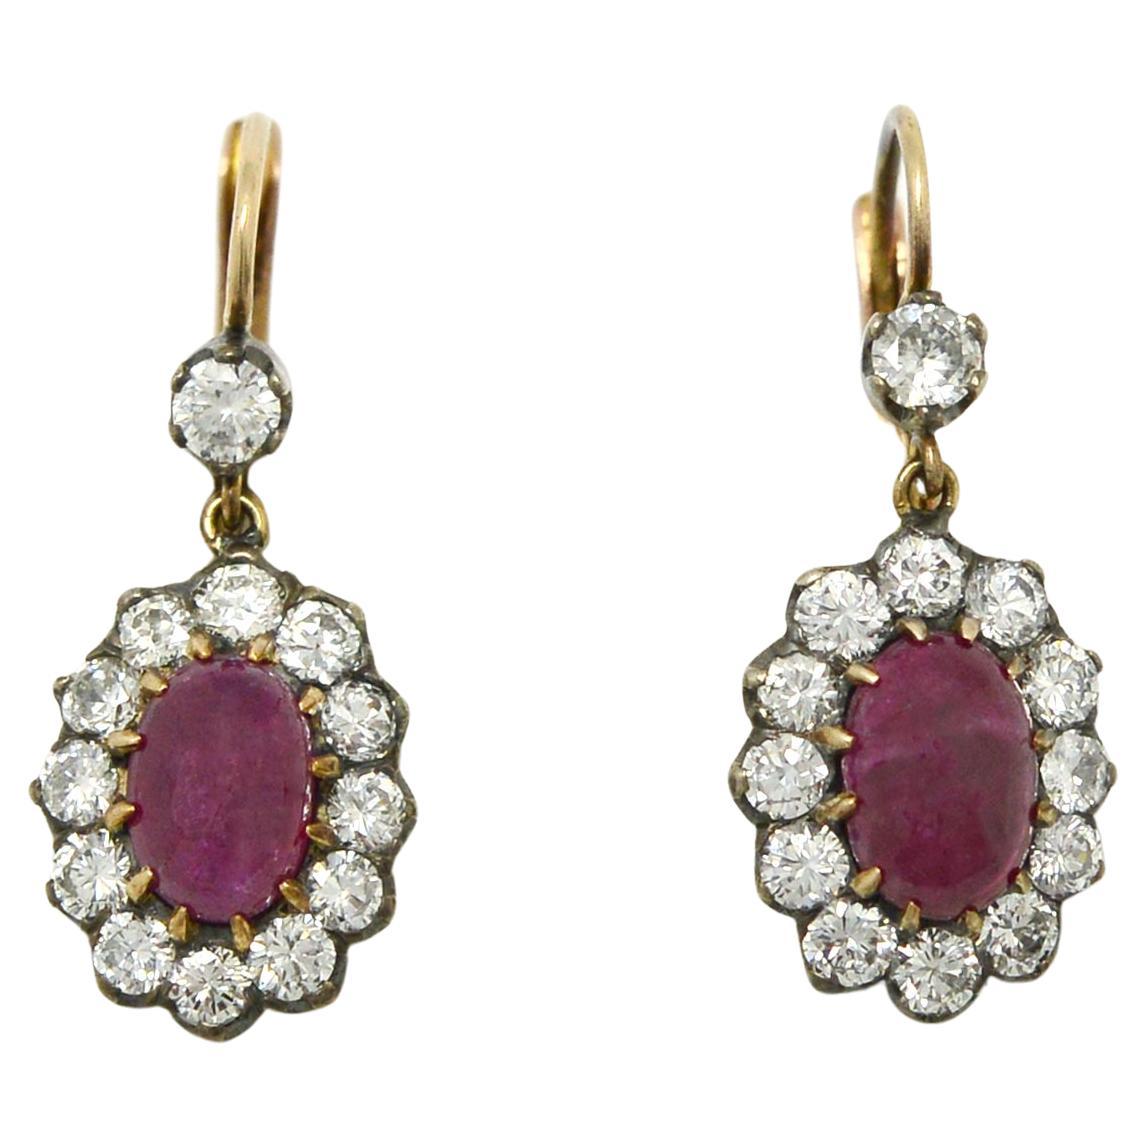 5 Carat Antique Ruby Diamond Cluster Earrings Vivid Red Oval Cabochon Dangles